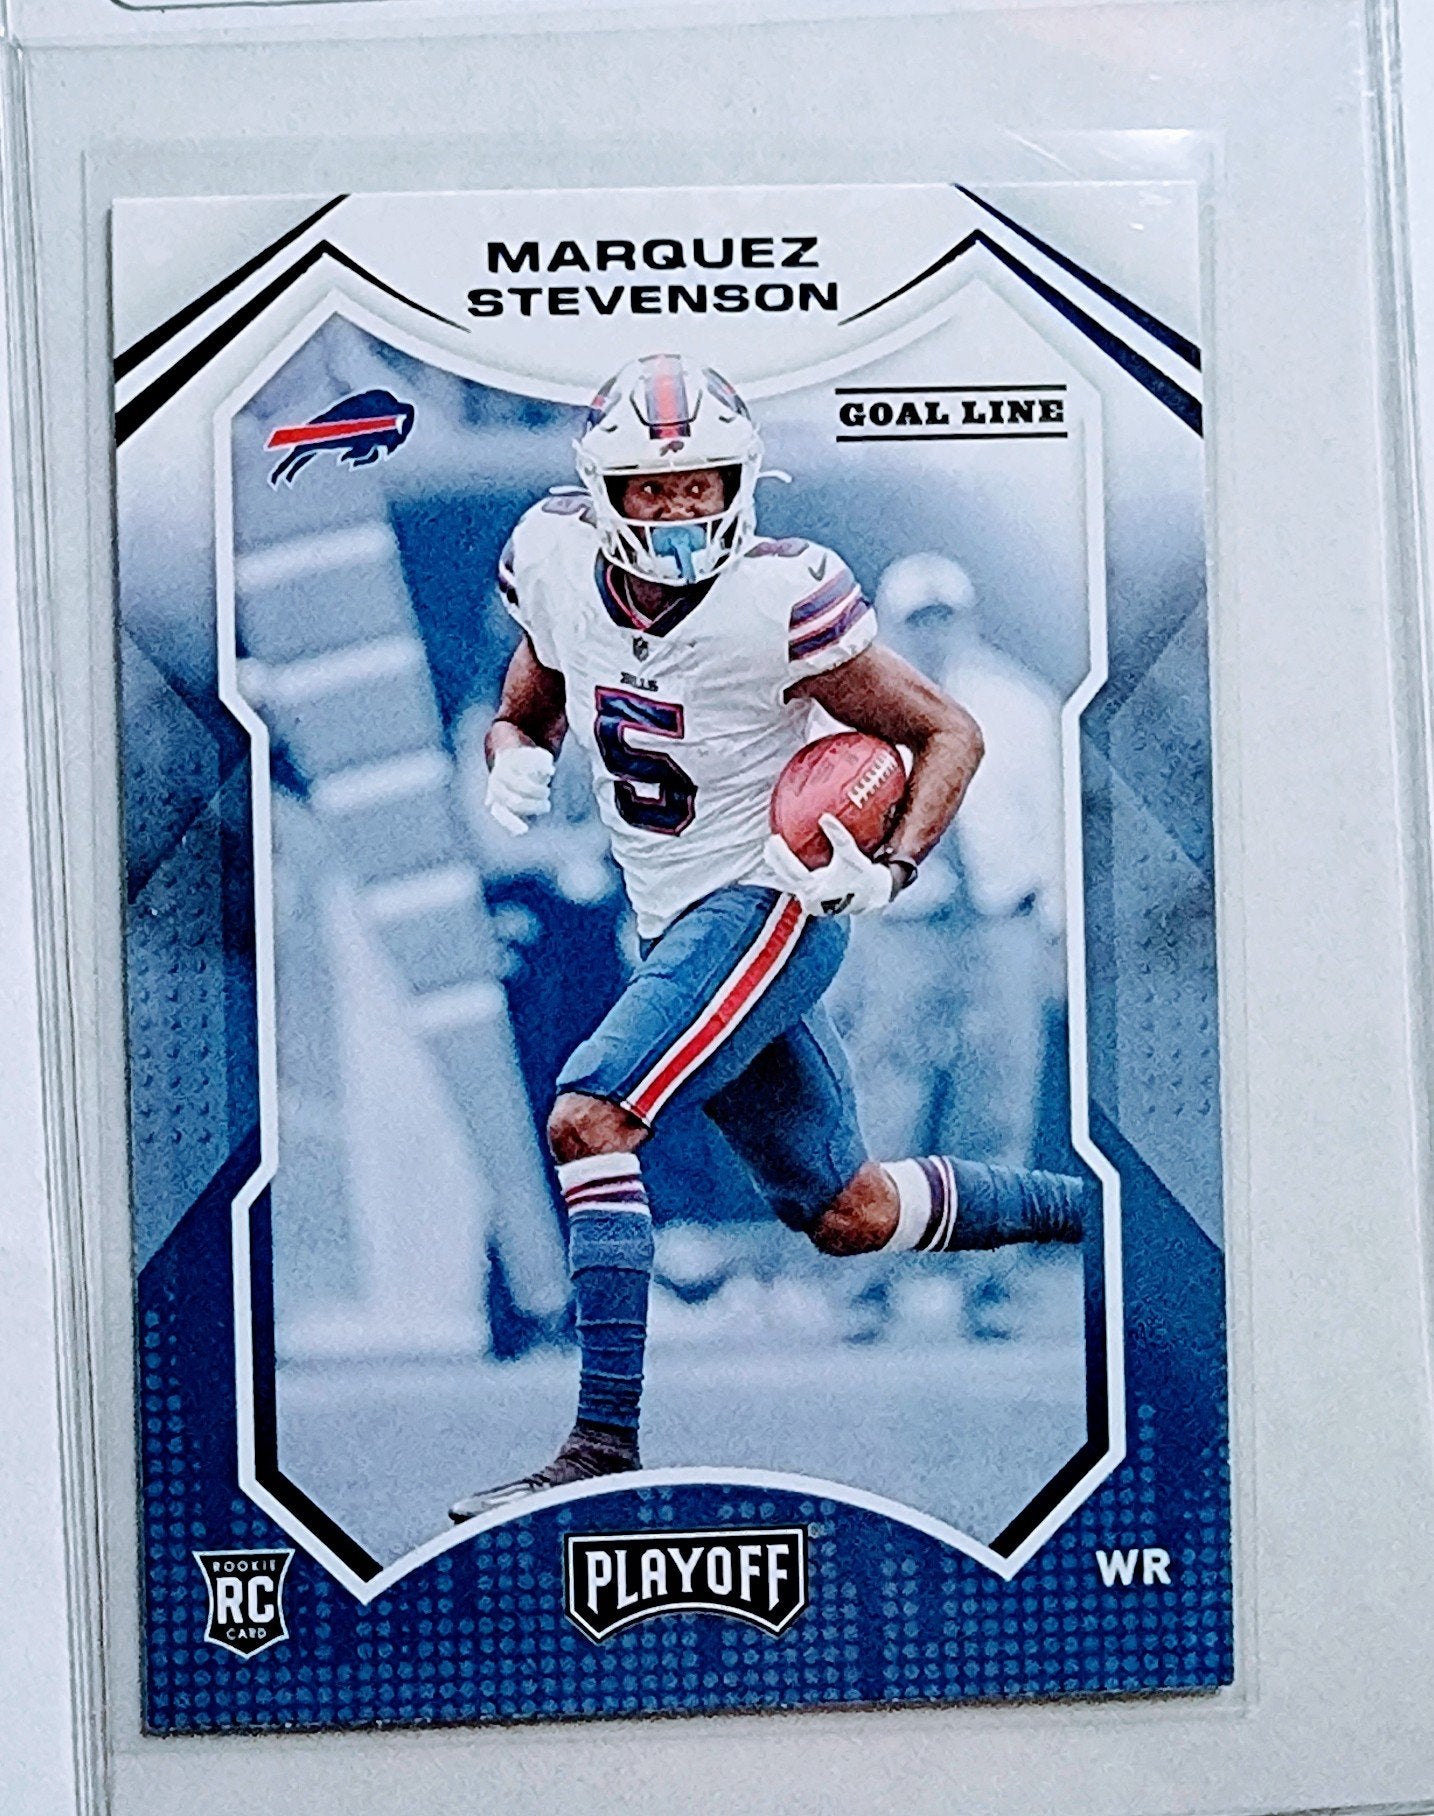 2021 Panini Rookies and Stars Marquez Stevenson Goal Line Football Card AVM1 simple Xclusive Collectibles   